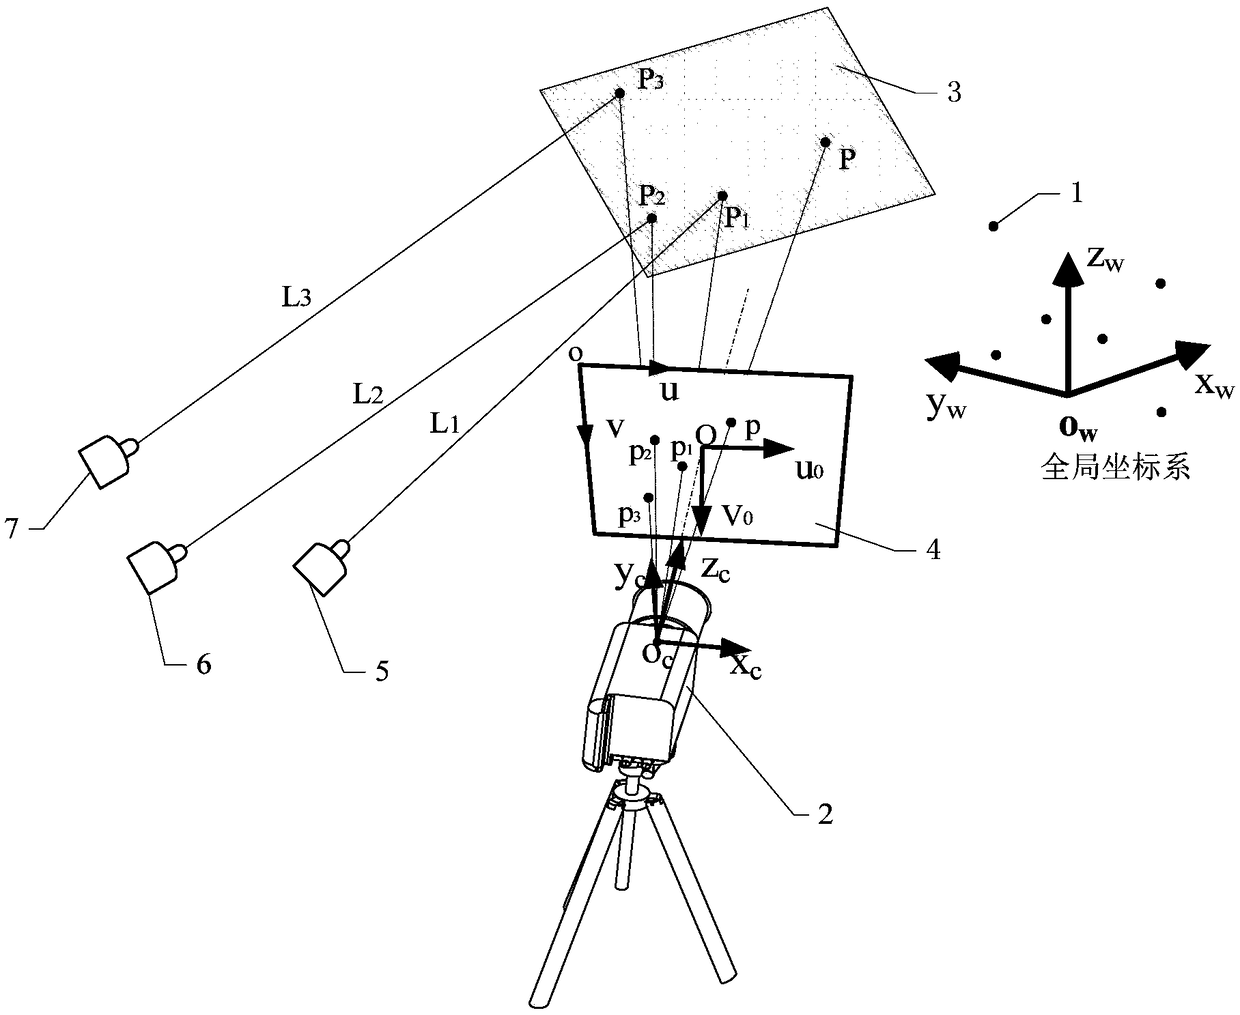 Monocular camera realizes dynamic point three-dimensional measurement